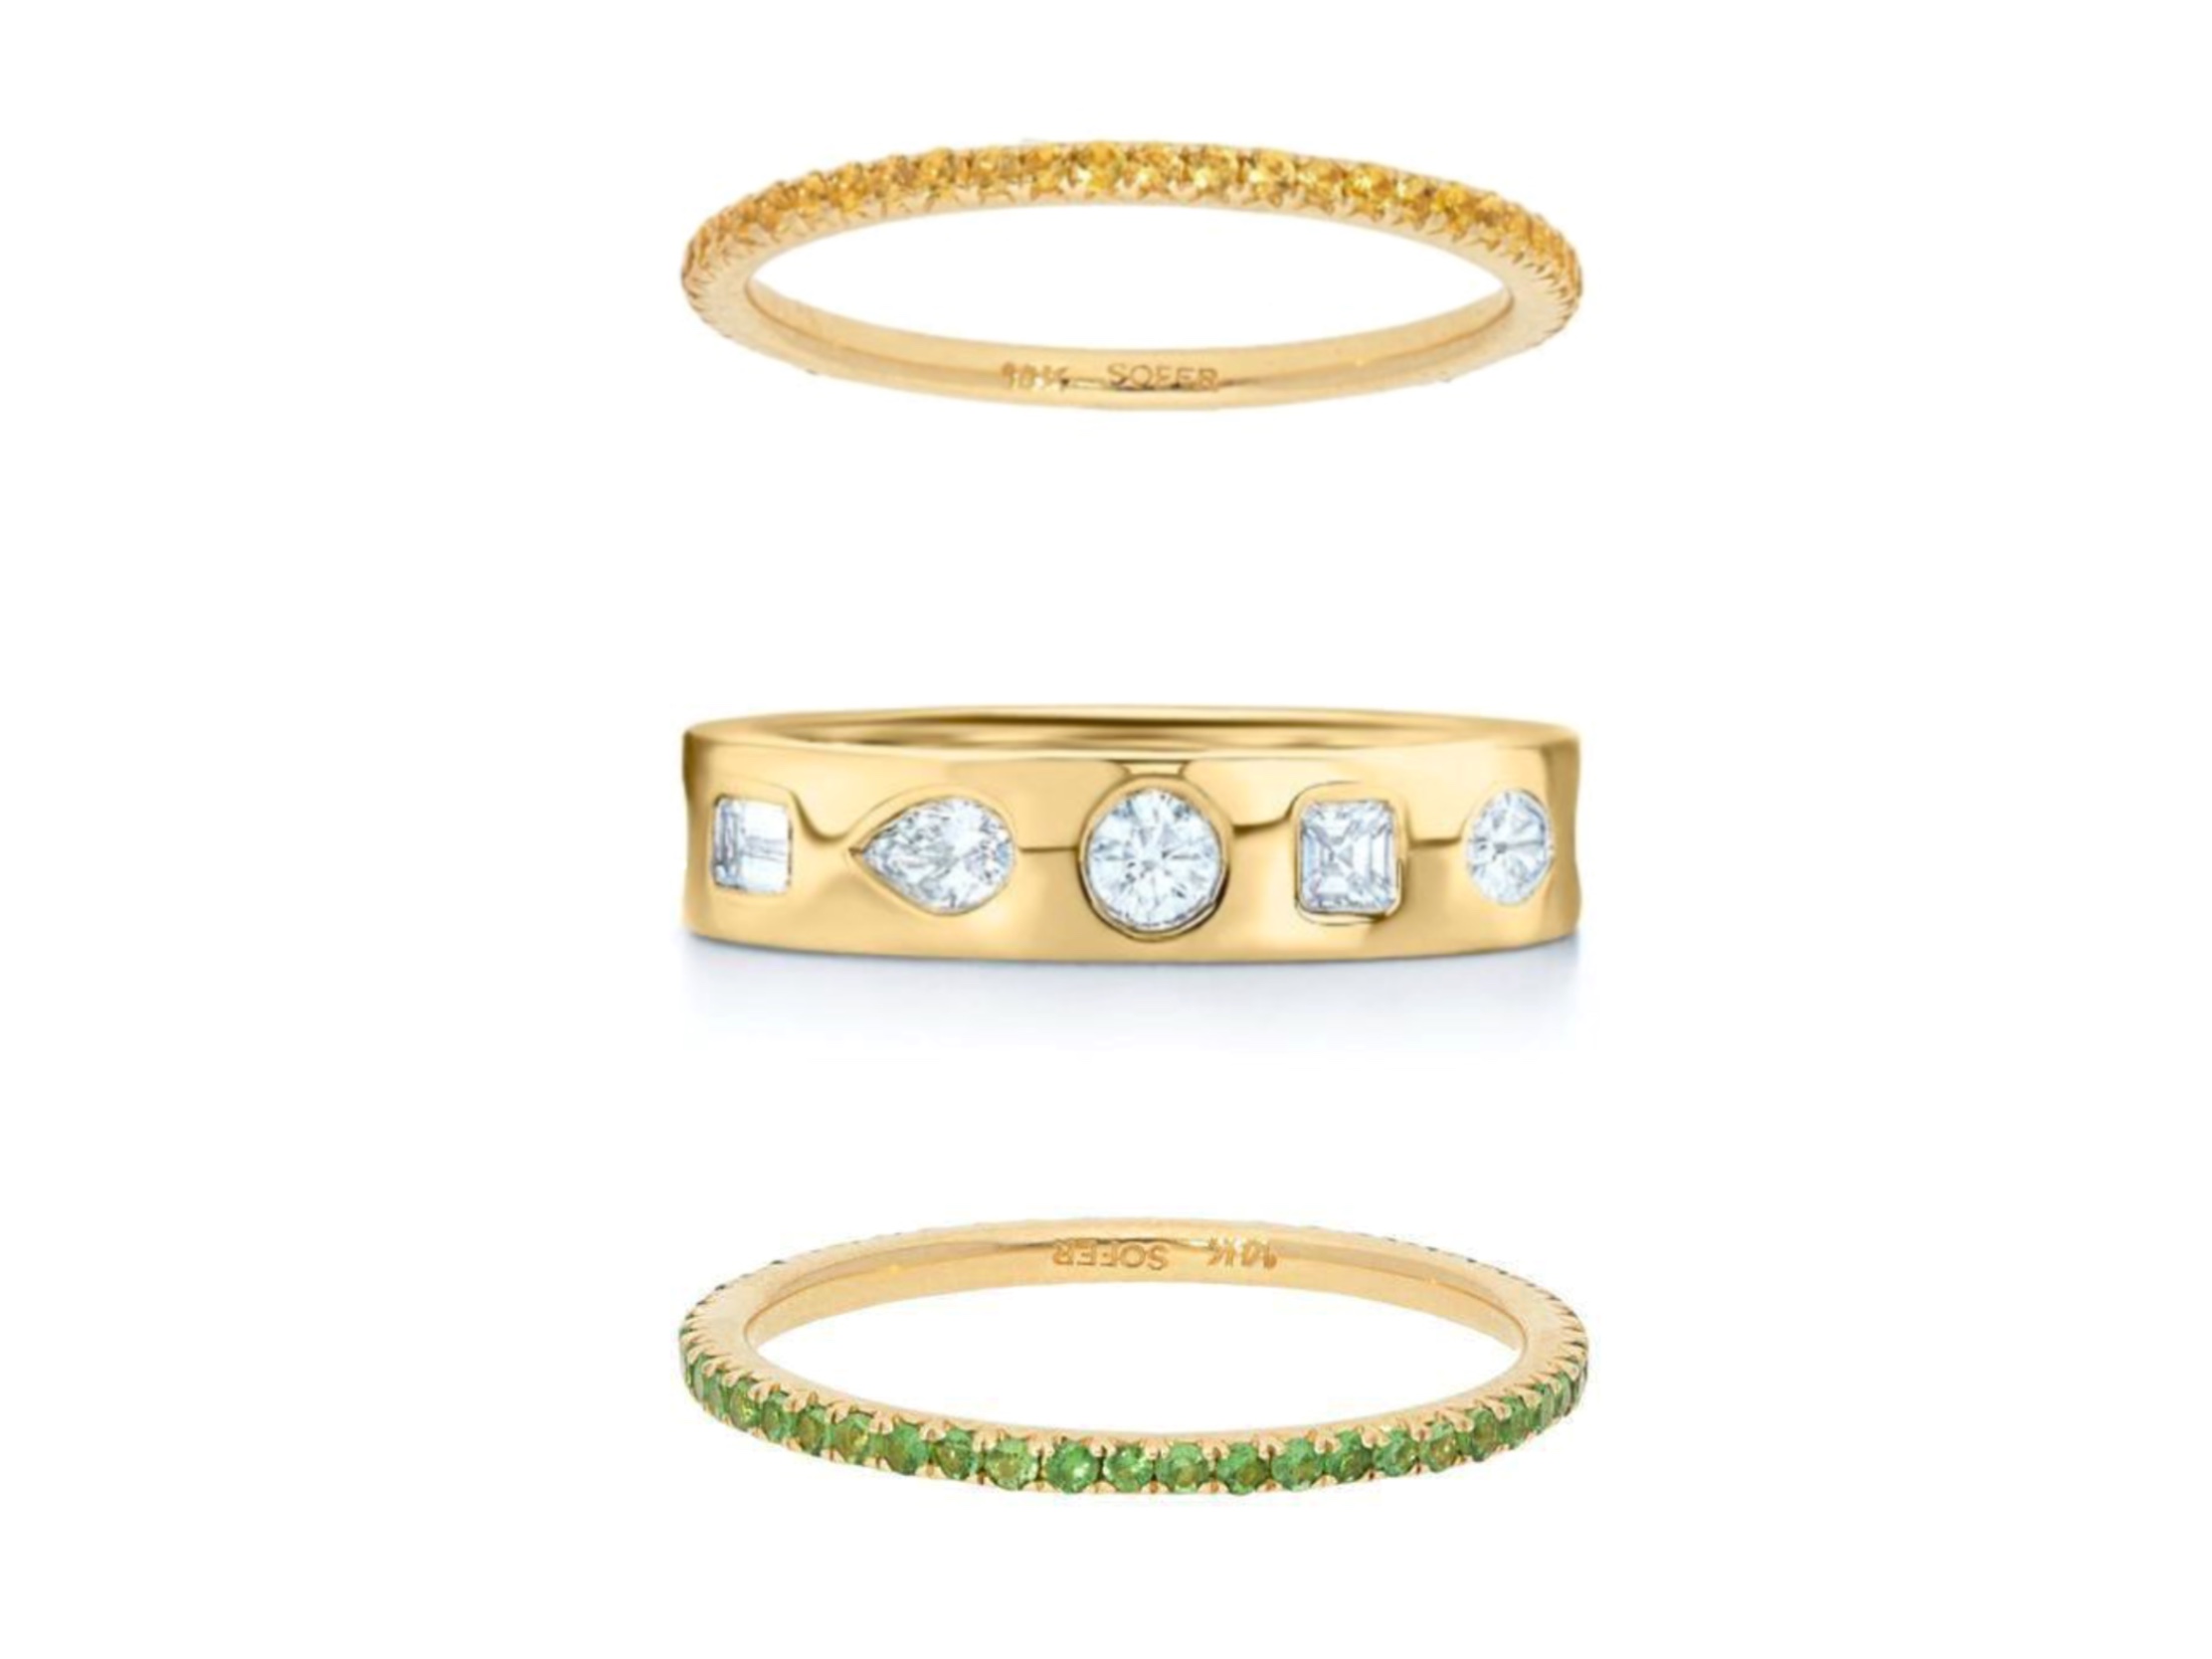 A stack of yellow gold rings with different gemstones. The bottom ring is a the  Tsavorite Pavé Eternity Stackable Band from Deutsch Signature, the center band is the Stackable Ring with Fancy Shape Diamonds by Kwiat and the top band is the Deutsch Signature Yellow Sapphire Eternity Band, all available at Deutsch Fine Jewelry in Houston, Texas.